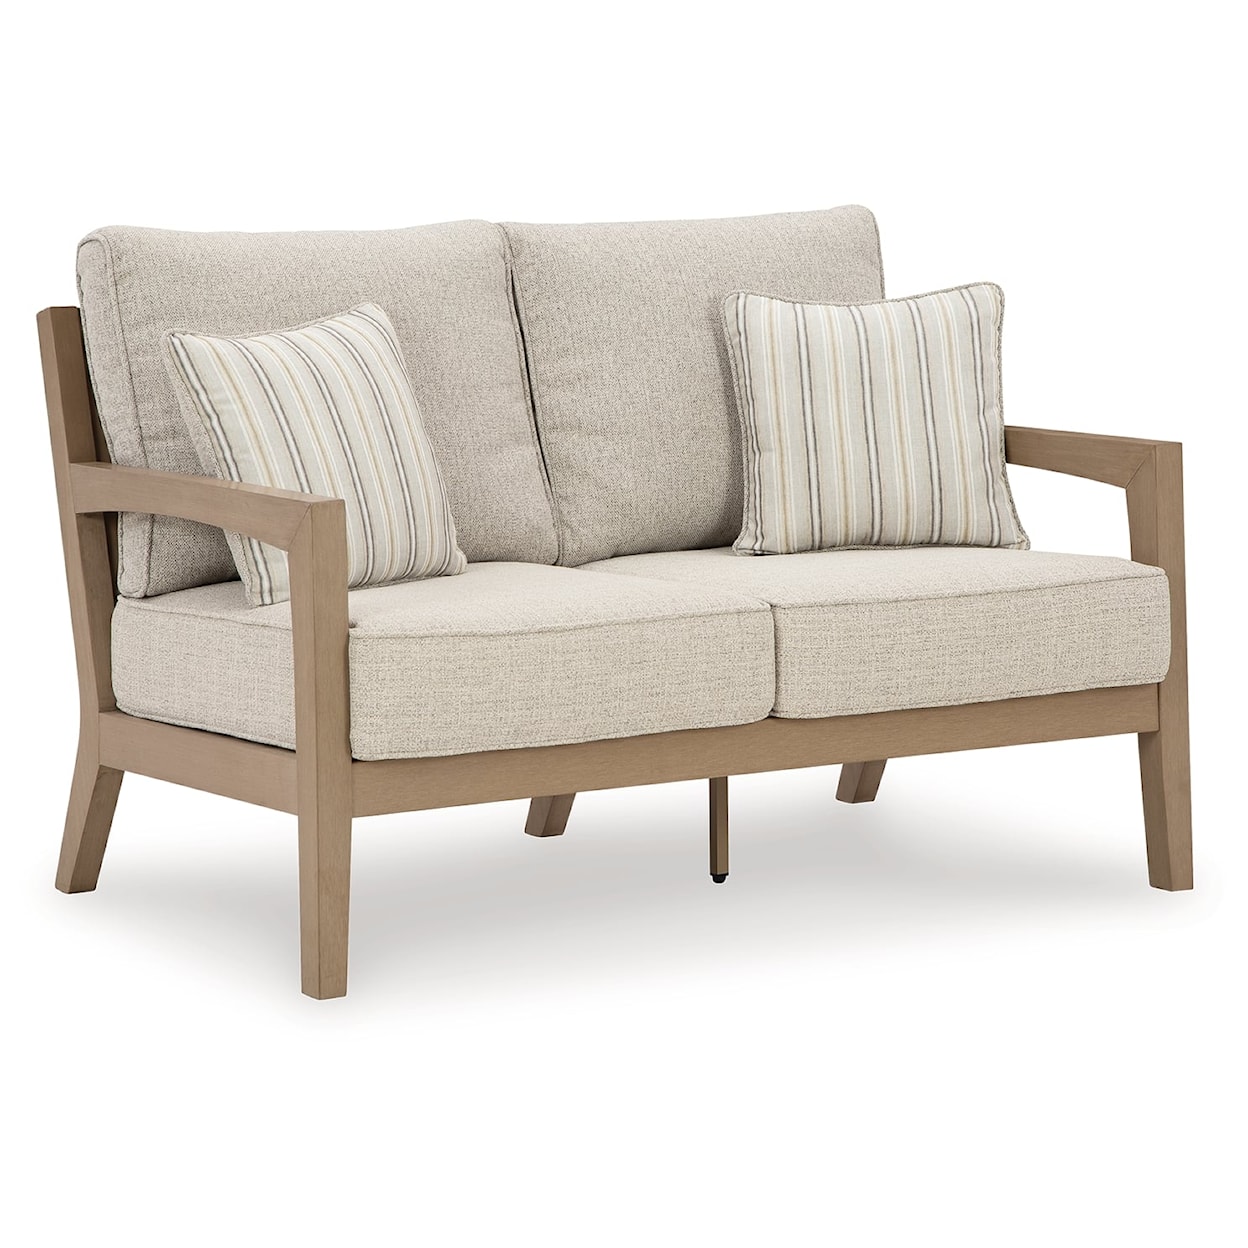 Benchcraft Hallow Creek Outdoor Loveseat with Cushion